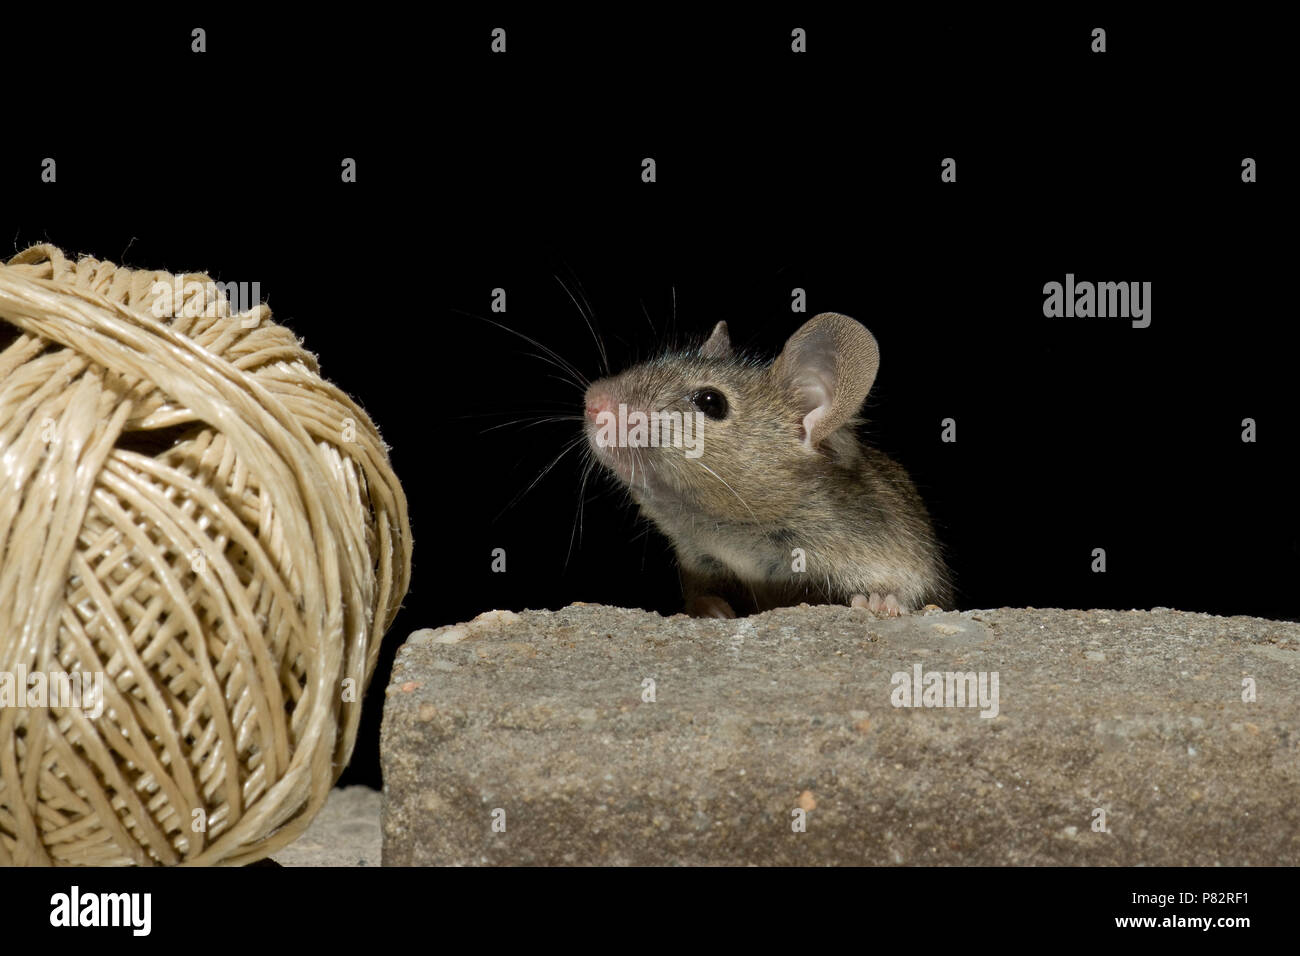 Huismuis in huis; House Mouse in house Stock Photo